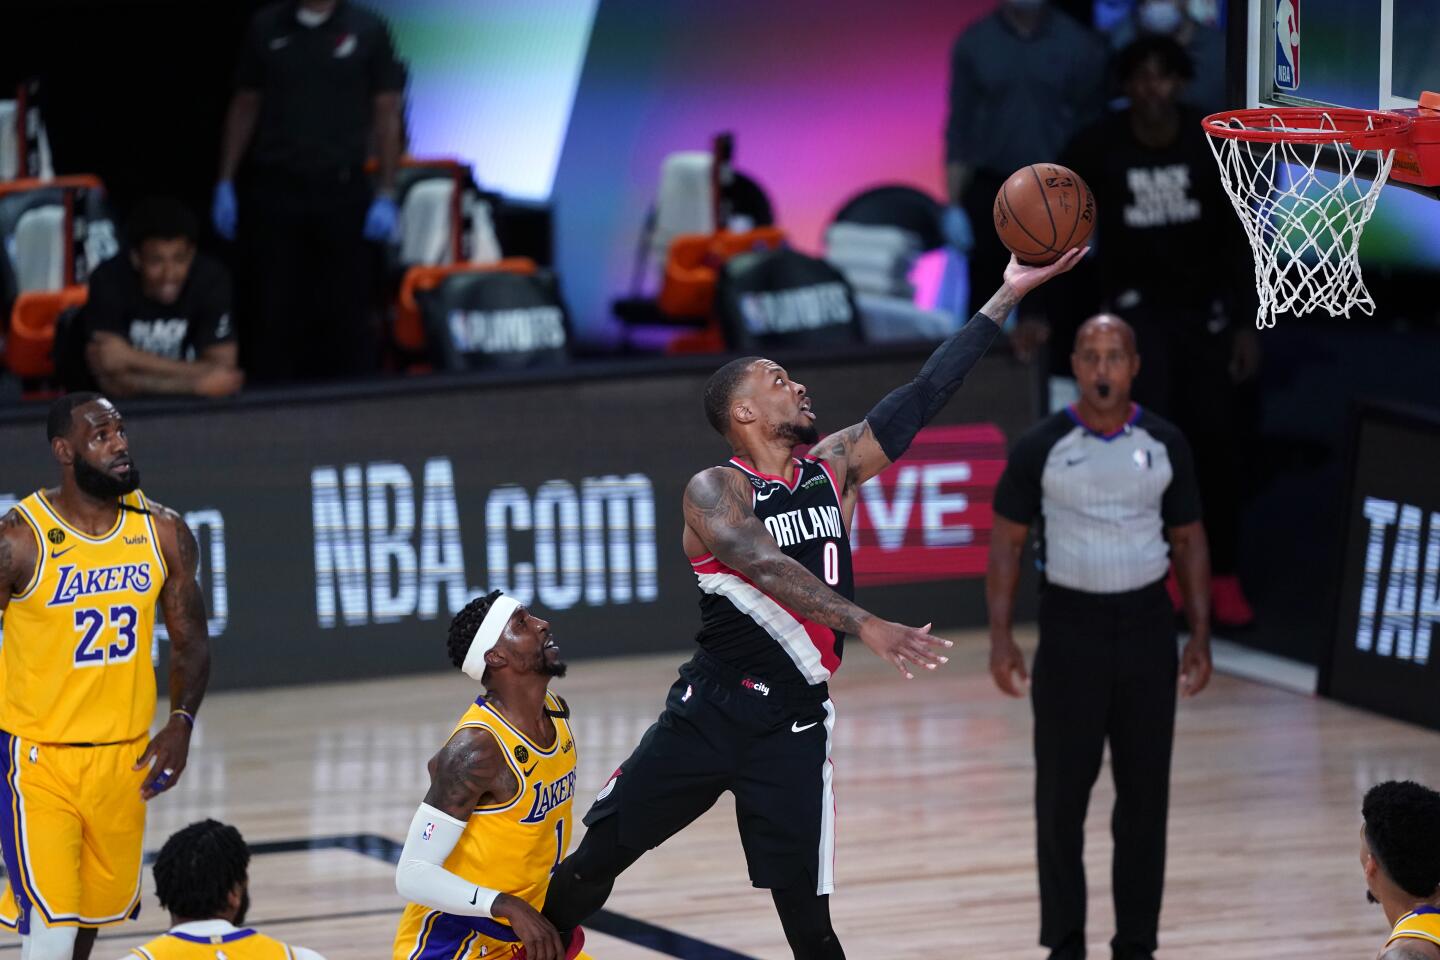 Portland Trail Blazers guard Damian Lillard goes to the basket over Los Angeles Lakers guard Kentavious Caldwell-Pope during the first half.